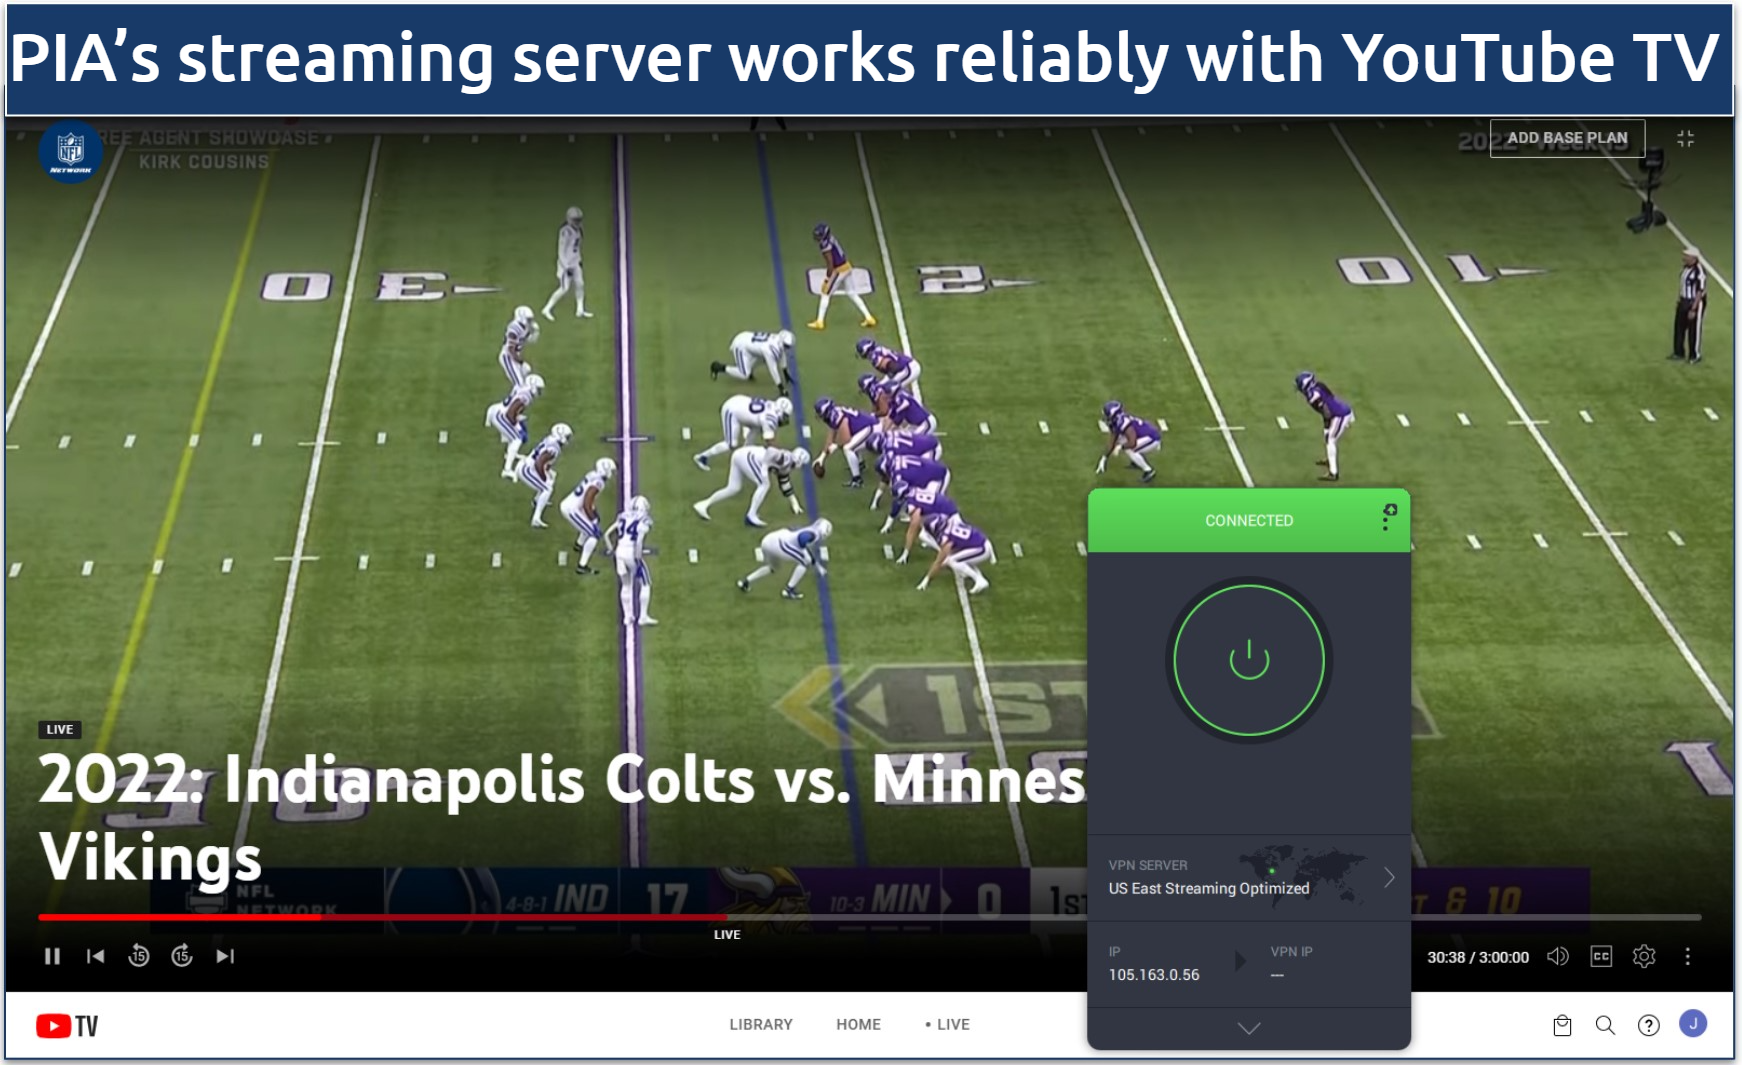 Screenshot of the NFL playing on YouTube TV with PIA connected to the US East streaming optimized server